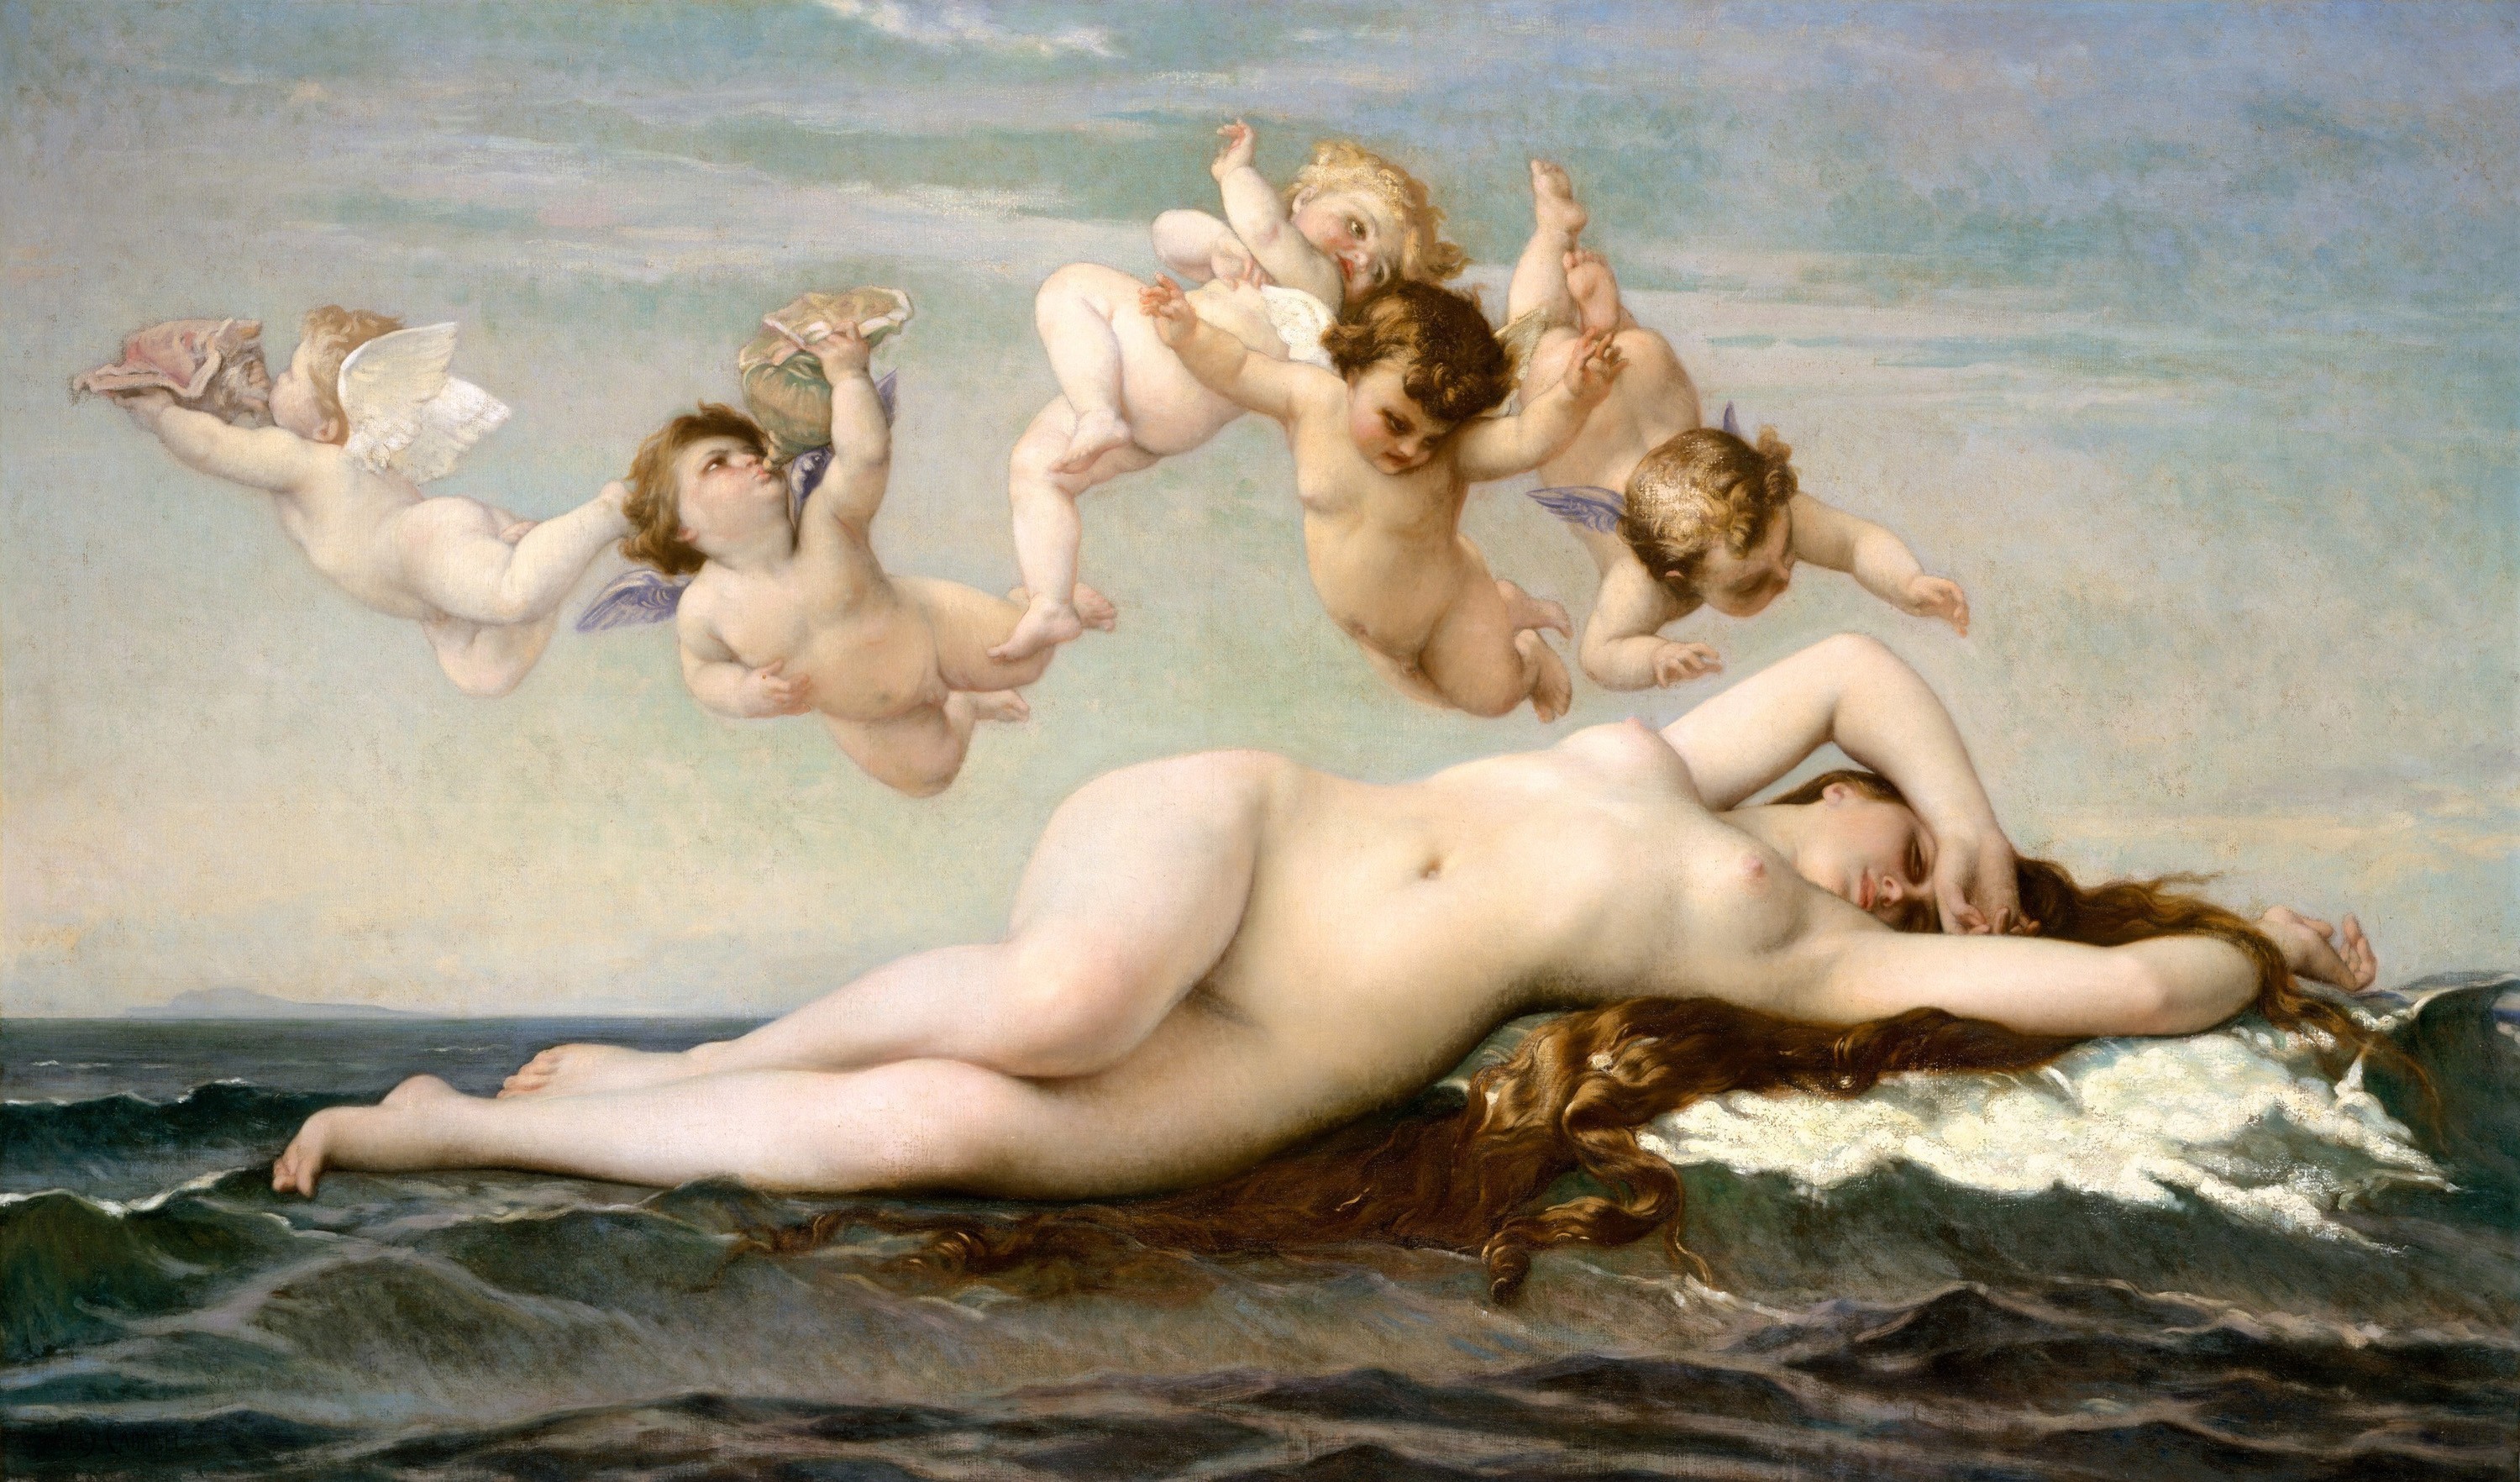 A picture of Aphrodite lying in the sea, with five babies with wings flying above her